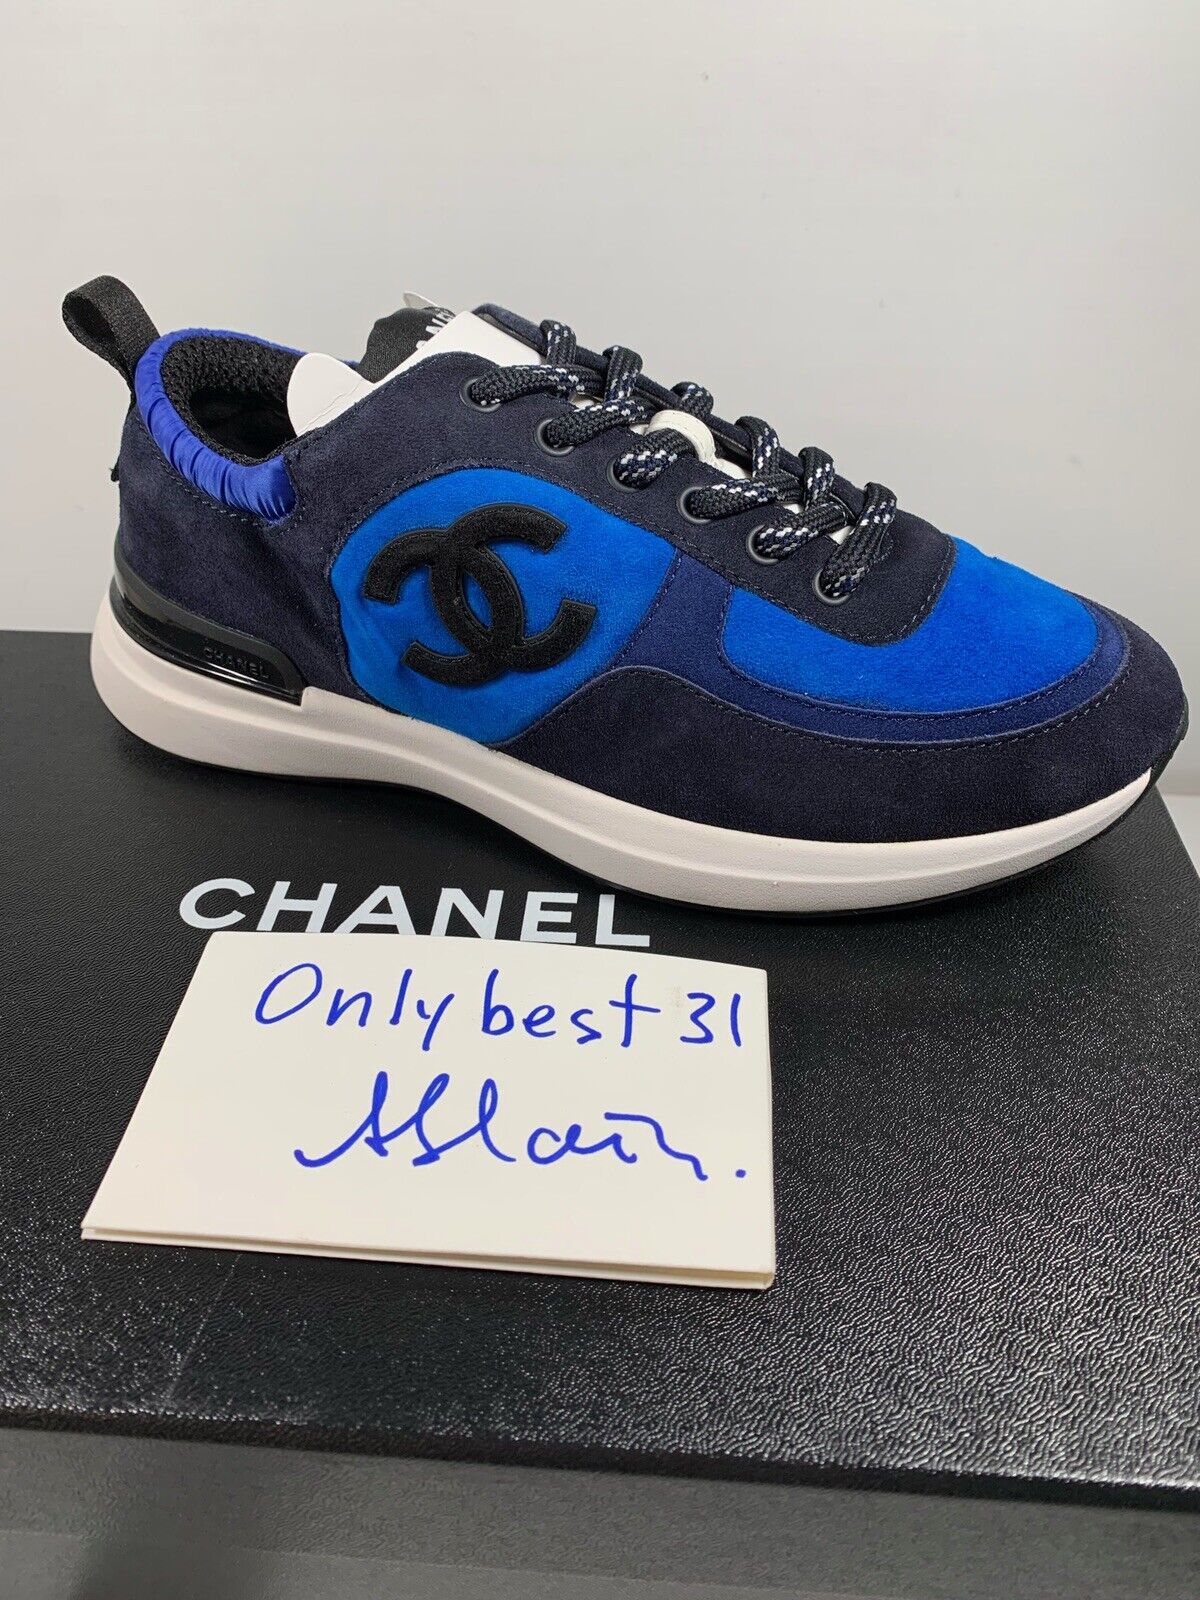 Chanel 2021 blue and black sneakers runners trainers 36.5-39.5 EUR sizes